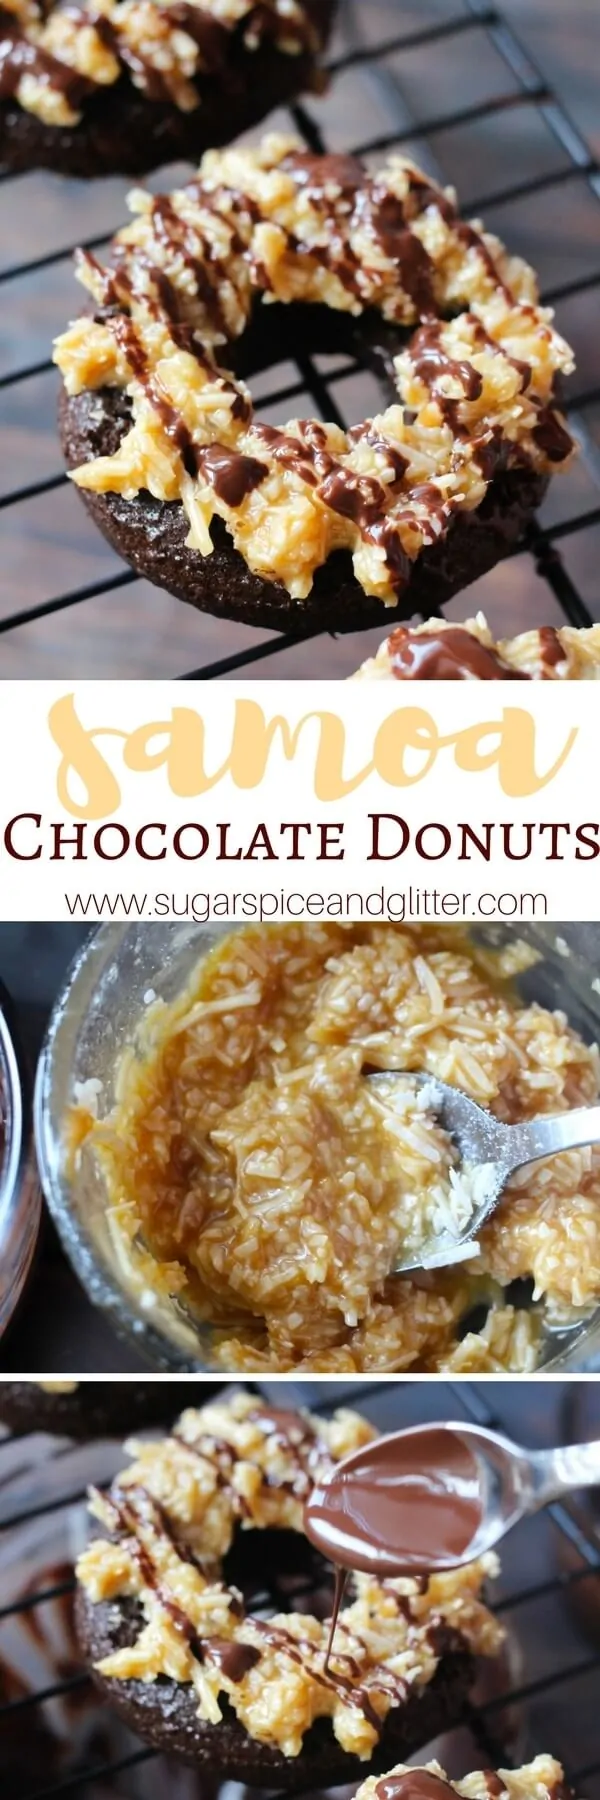 The best homemade donuts you will ever taste - these Samoa Chocolate Donuts are topped with crunchy, sweet caramel-coconut topping and drizzled with coconut oil-spiked chocolate for a delicious dessert that's even better than the original Samoas cookies